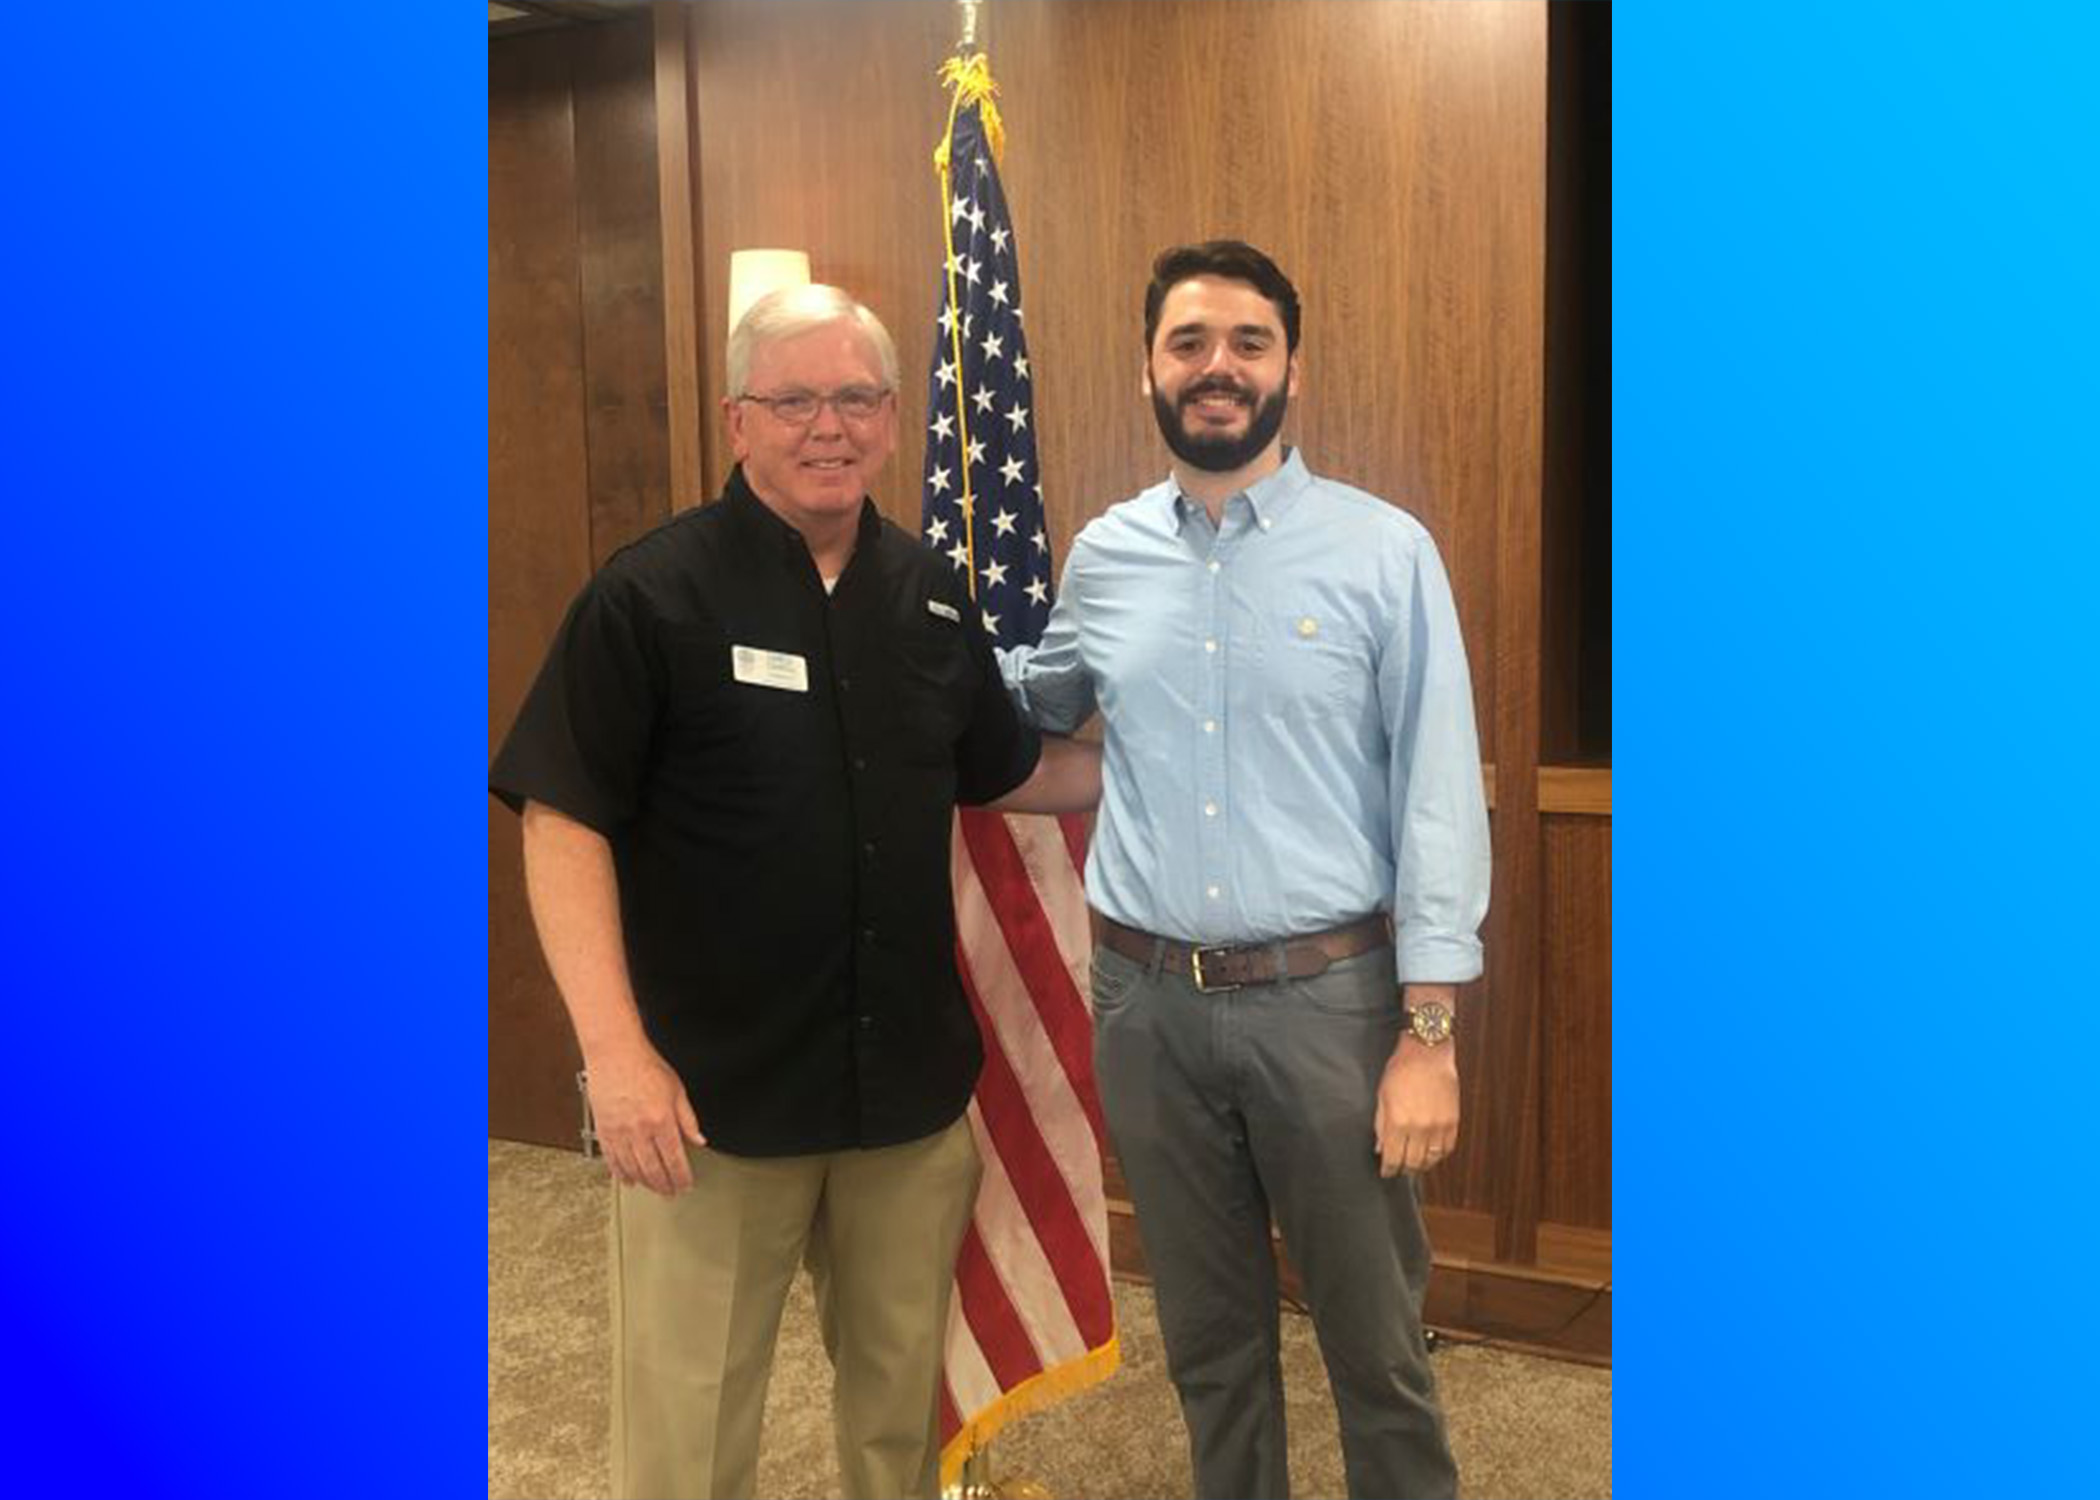 Trussville Rotary Daybreak inducts new member